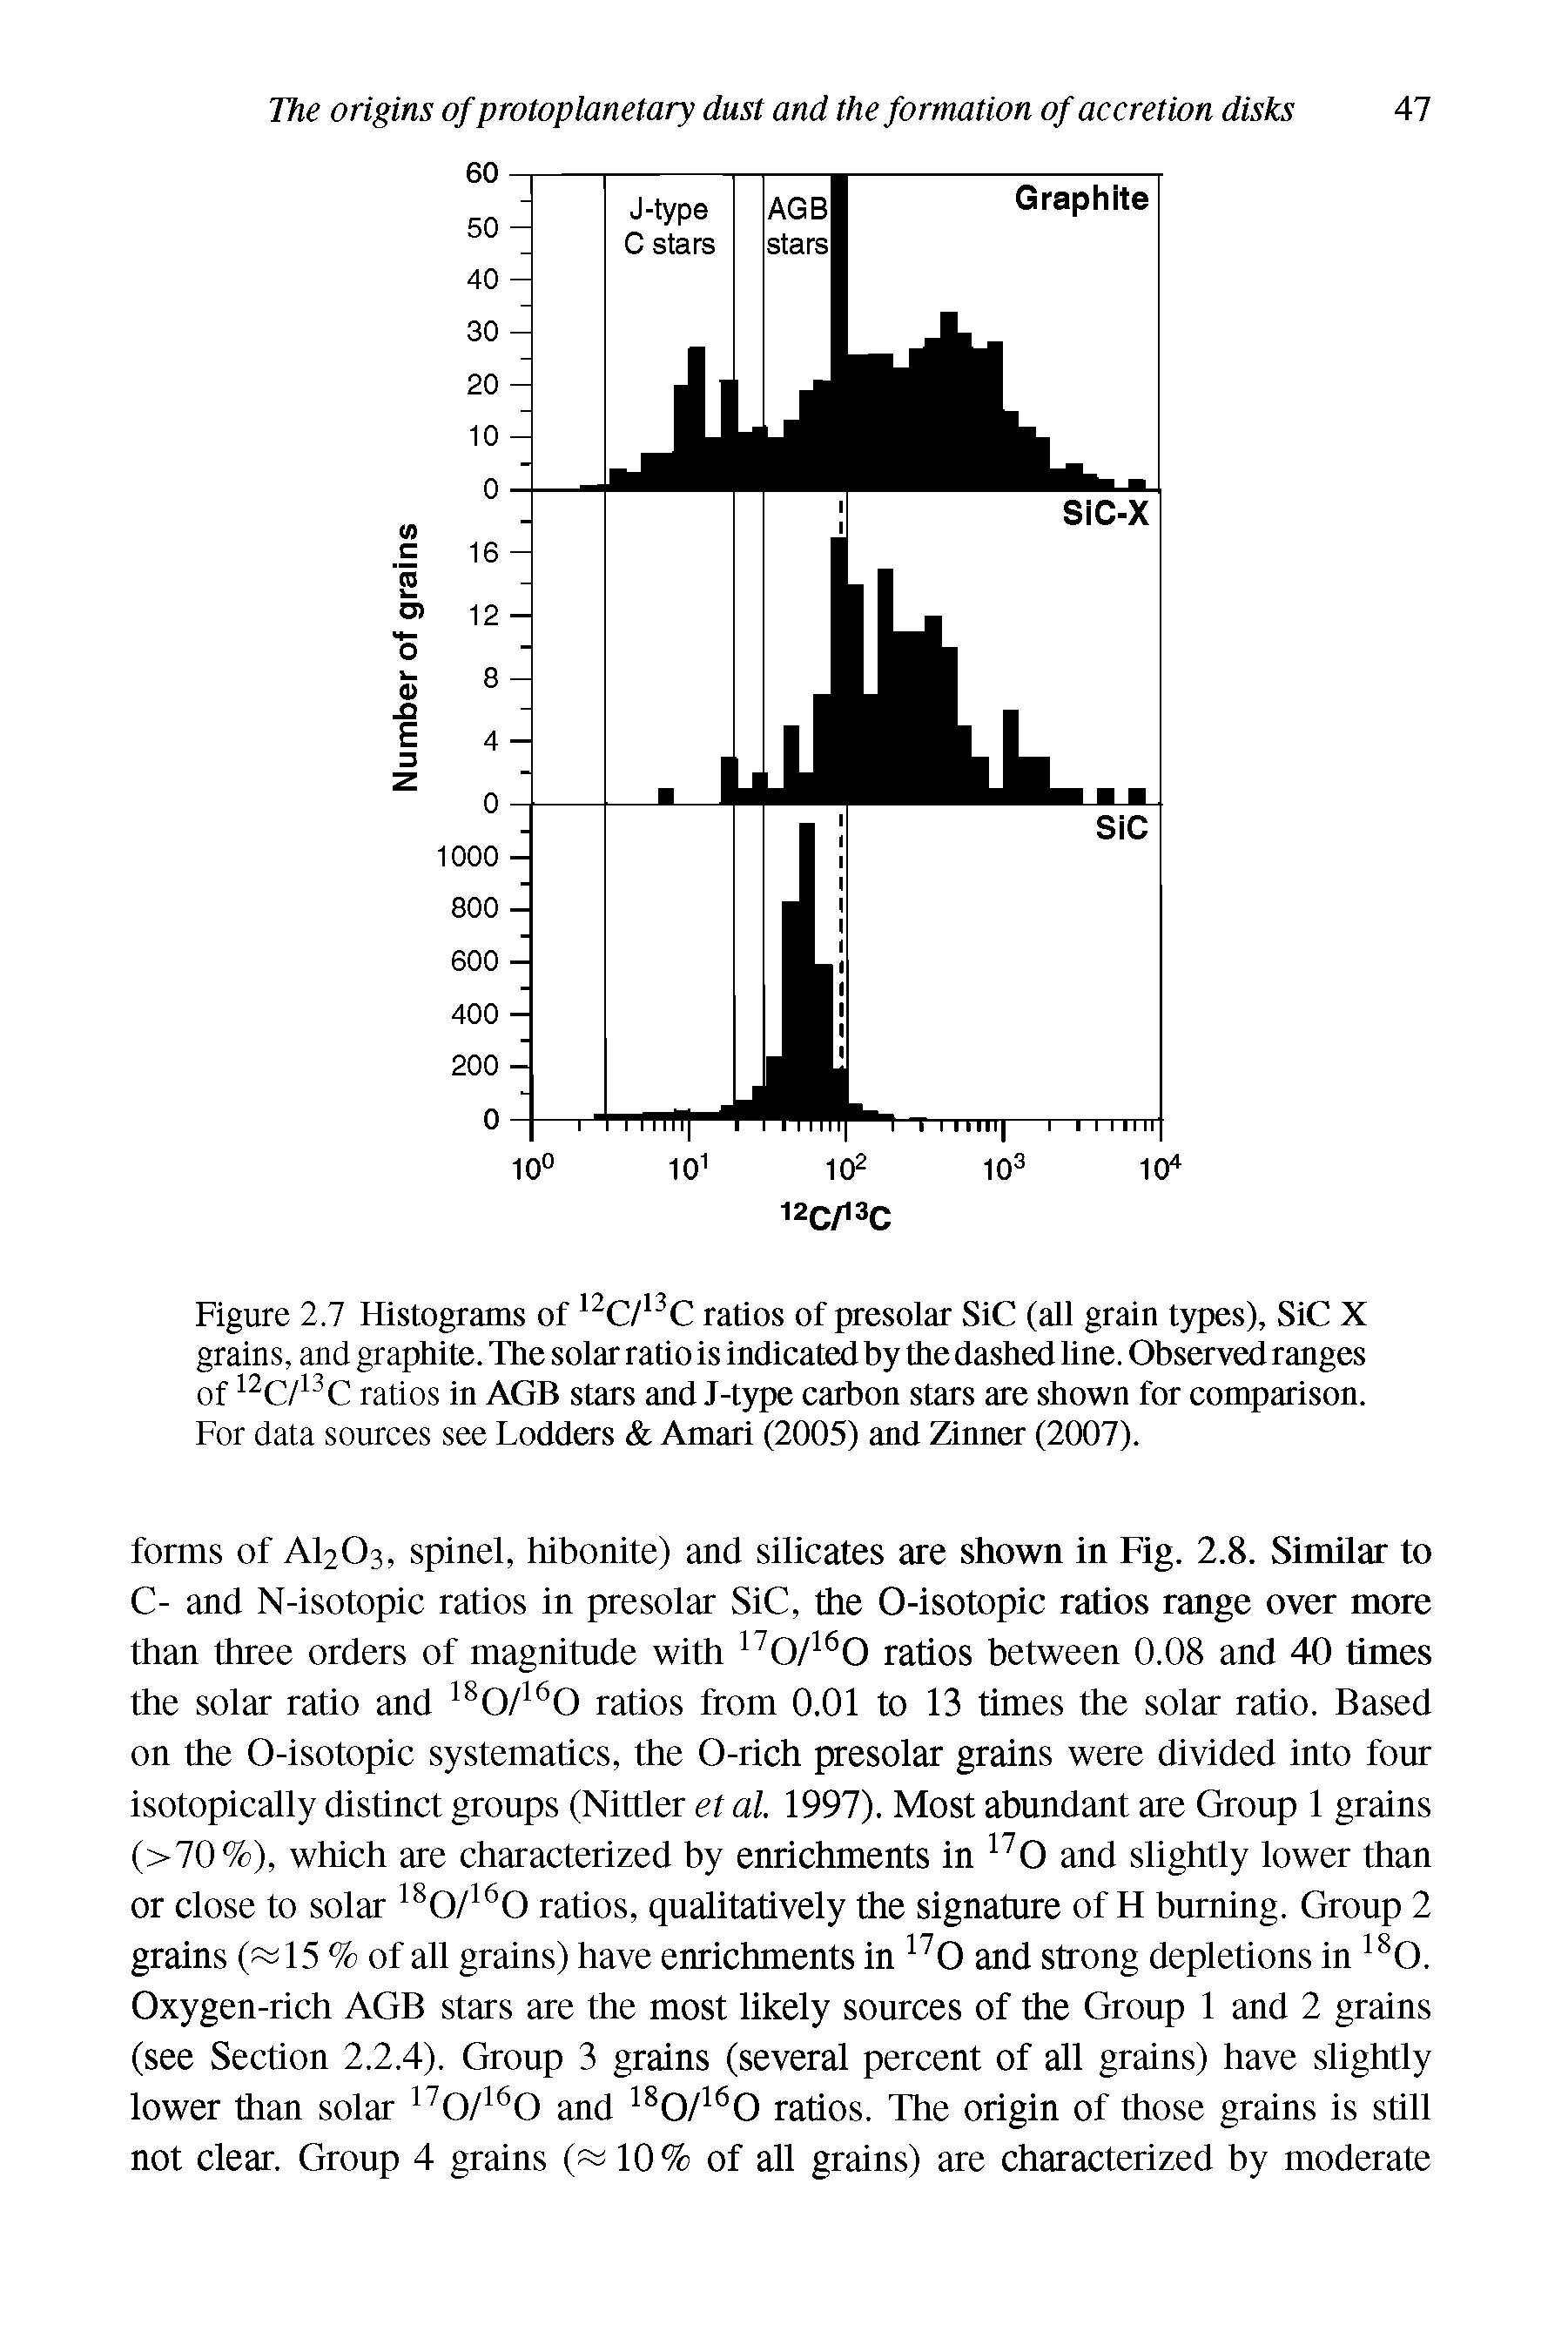 Figure 2.7 Histograms of 12C/13C ratios of presolar SiC (all grain types), SiC X grains, and graphite. The solar ratio is indicated by the dashed line. Observed ranges of 12C/13C ratios in AGB stars and J-type carbon stars are shown for comparison.